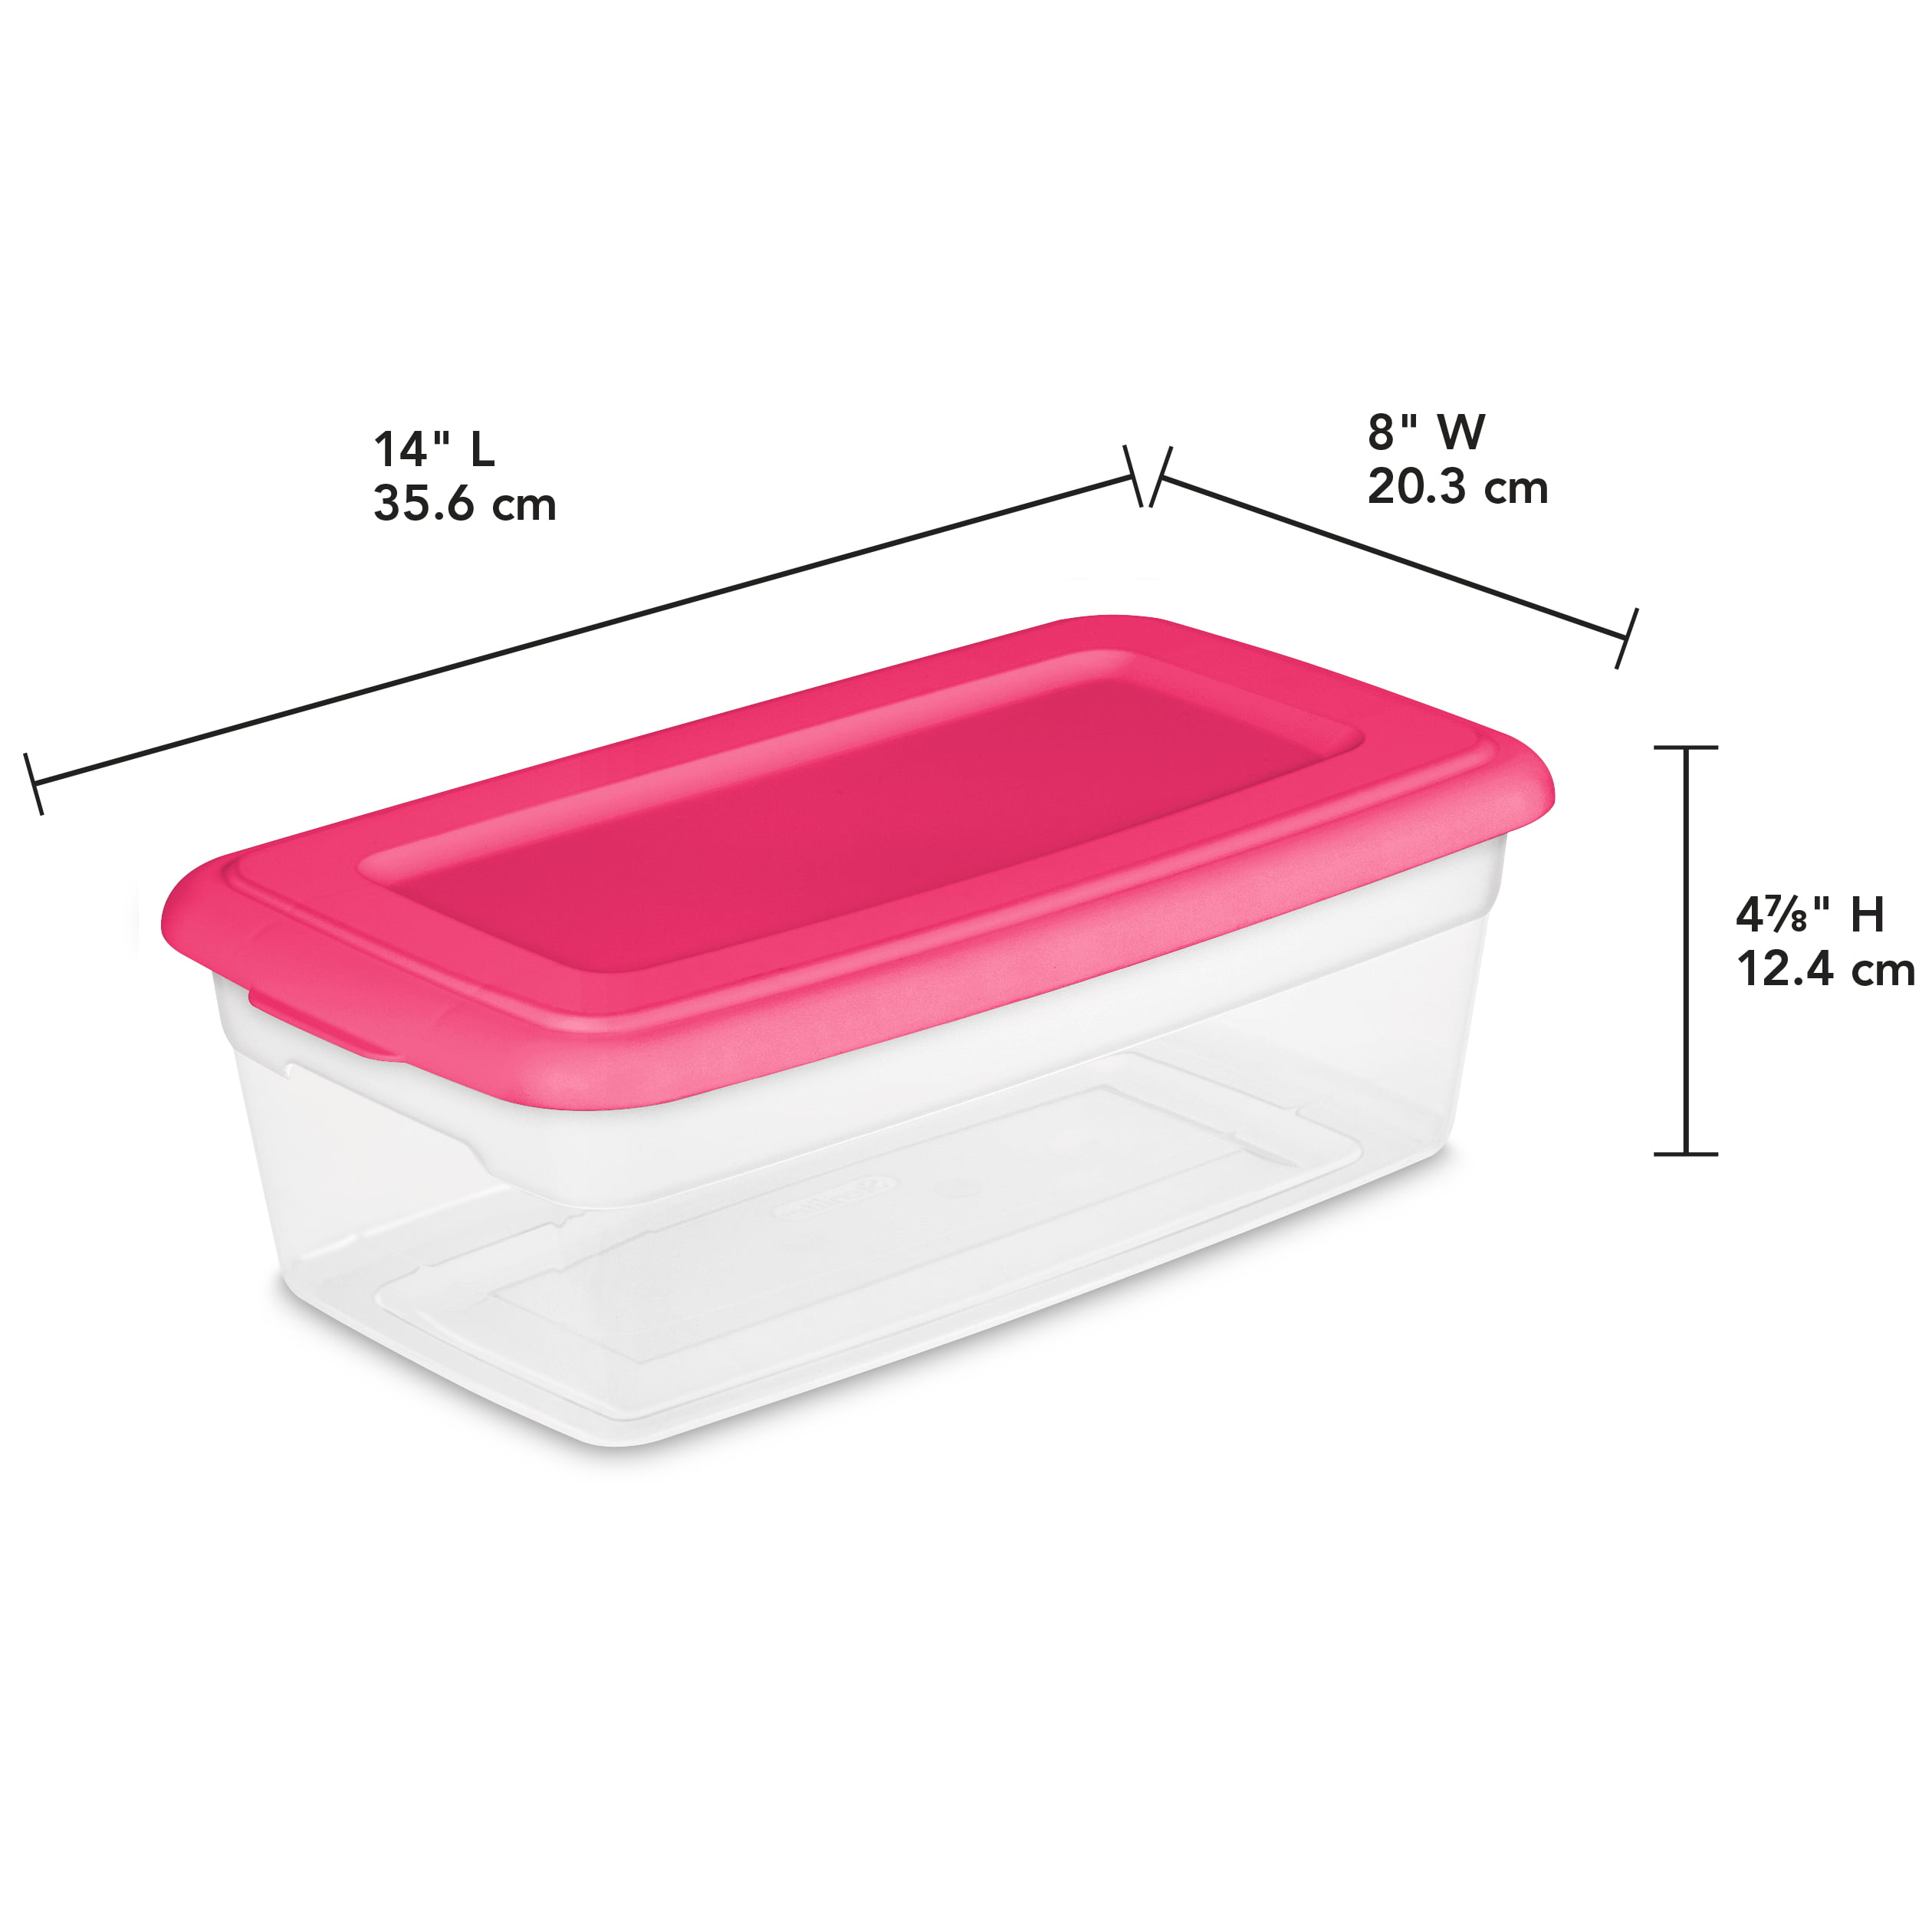 New Tupperware Large Food Storage Container 14L